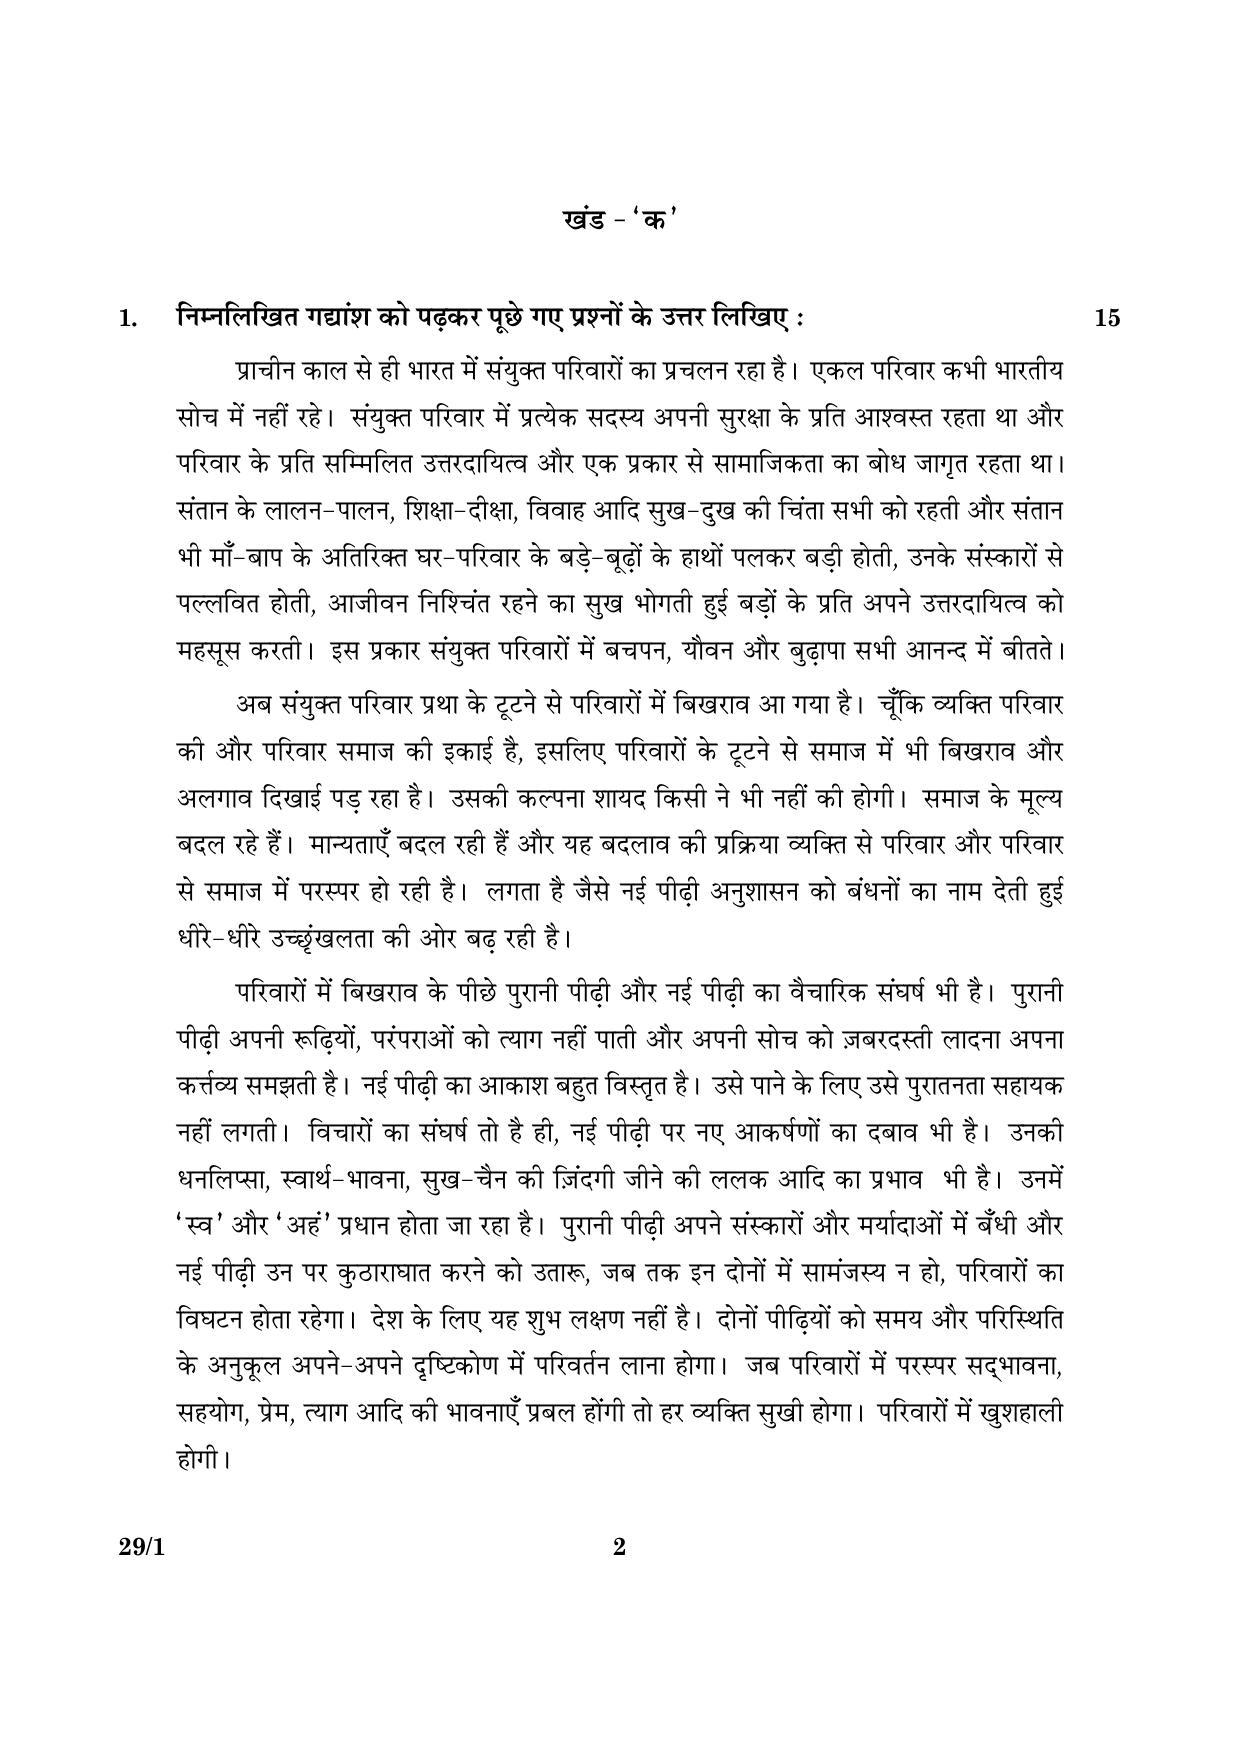 CBSE Class 12 029 Set 1 Hindi Elective 2016 Question Paper - Page 2